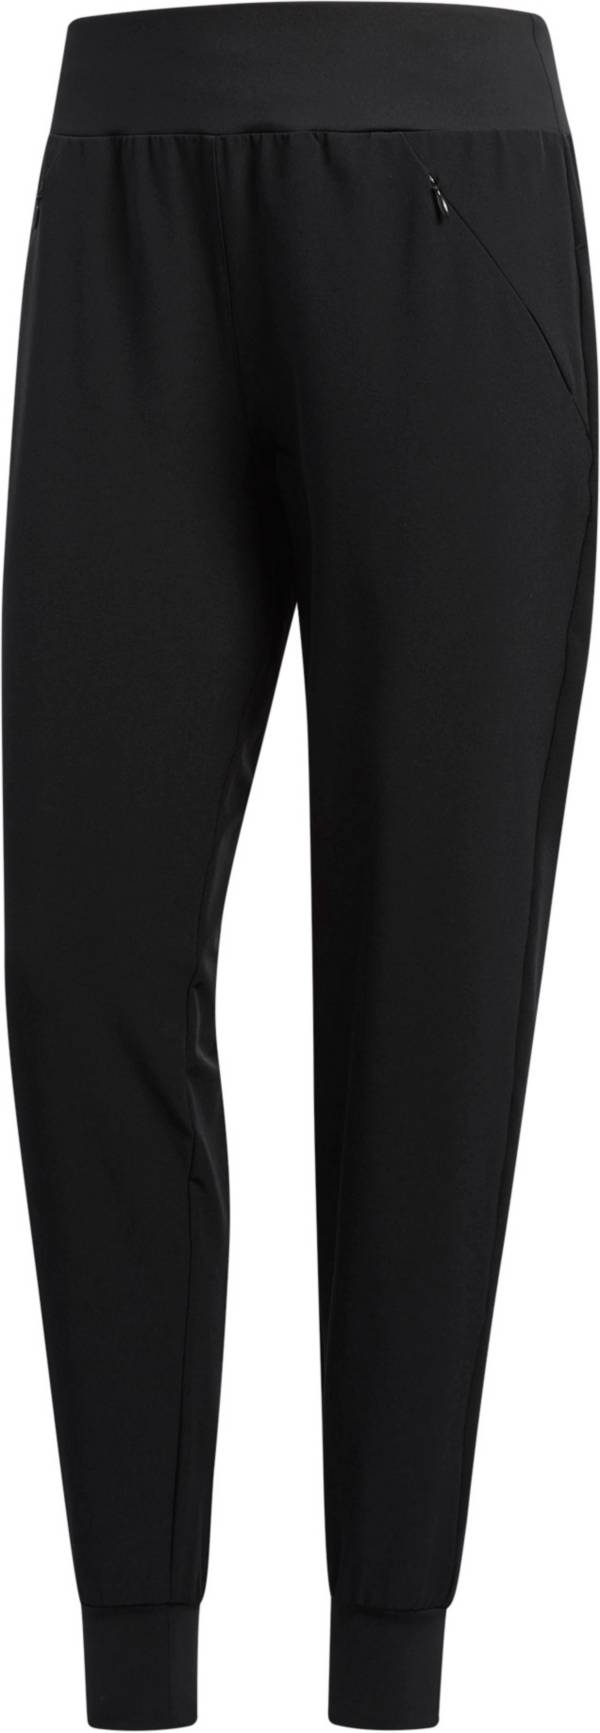 adidas Women's Beyond 18 Course Jogger Golf Pants product image